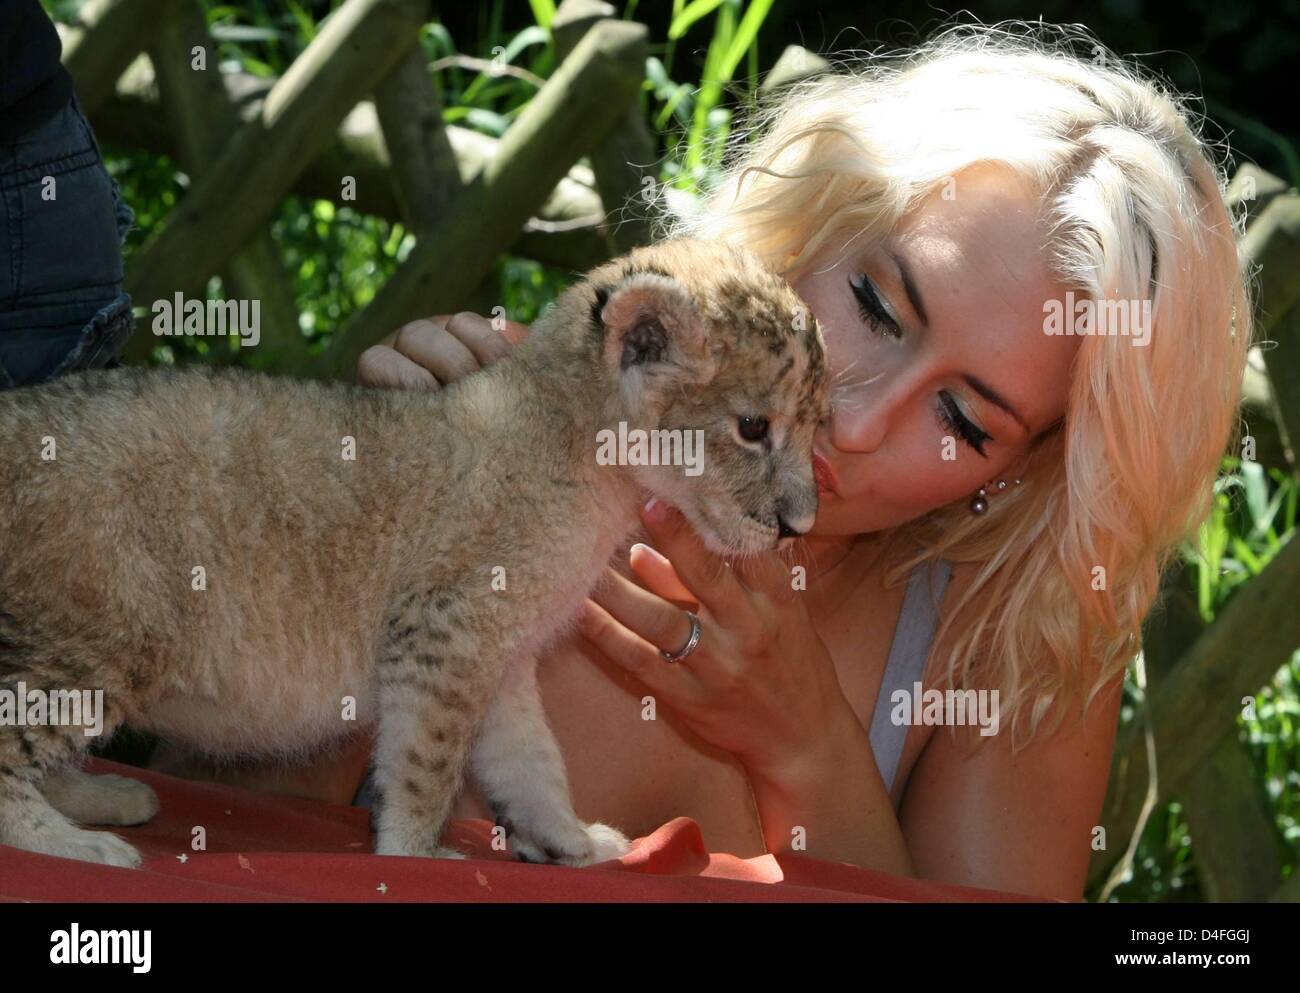 German singer Sarah Connor poses with four lion cubs baptised at Serengeti wildlife park Hodenhagen, Germany, 05 August 2008. The cubs named 'Tyler', 'Montry', 'Lex' and 'Mick' will be bottle-fed. Photo: HOLGER HOLLEMANN Stock Photo